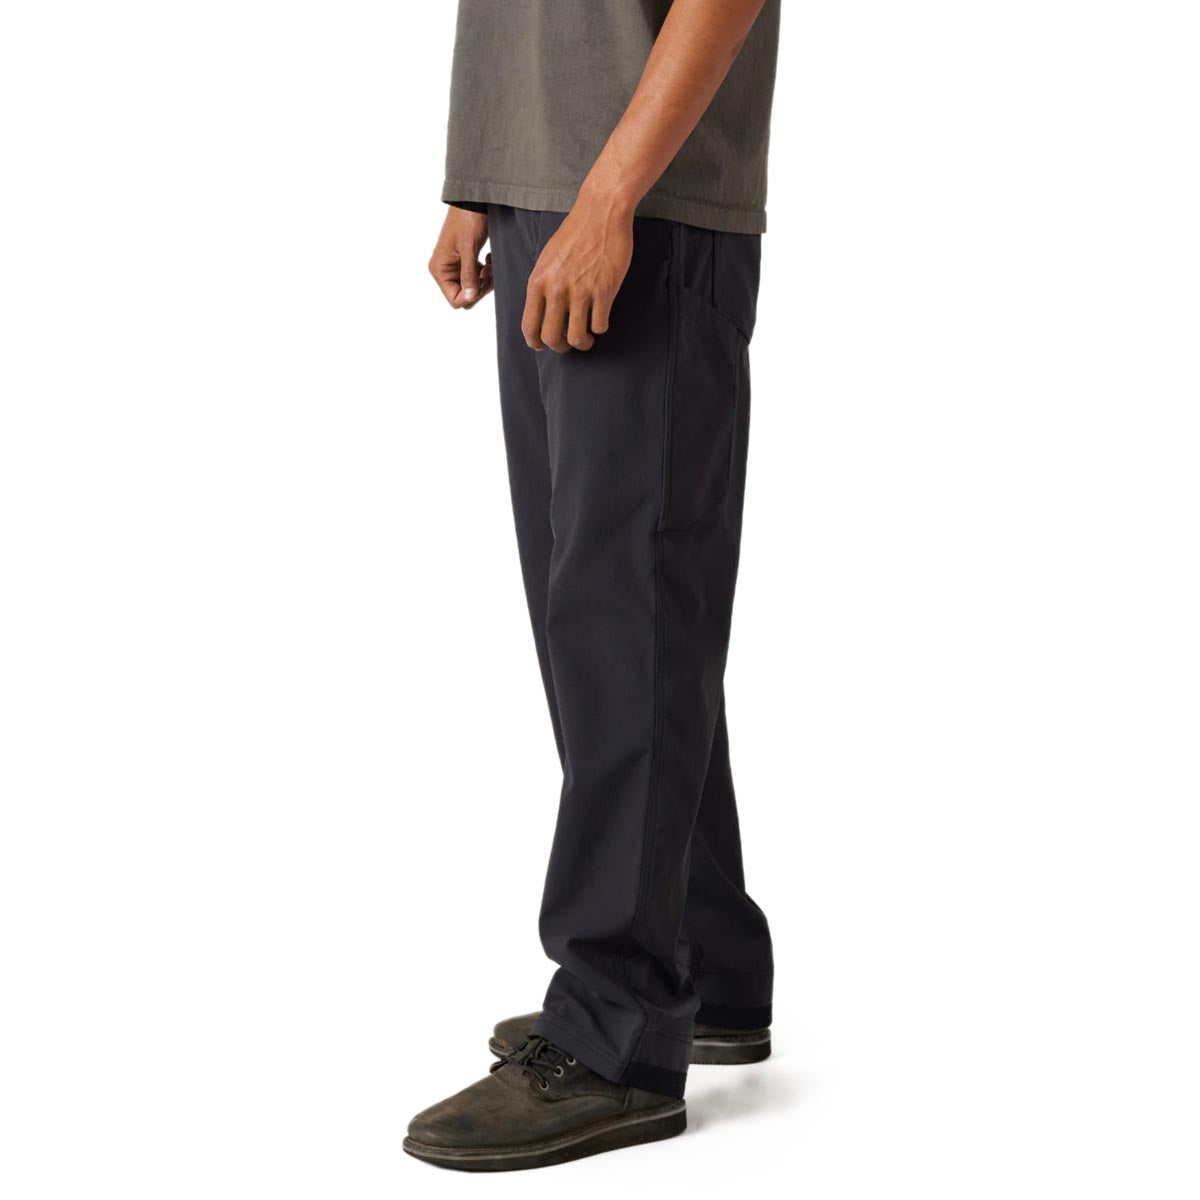 686 Everywhere Unwork Relaxed Fit Pants - Off Black image 3